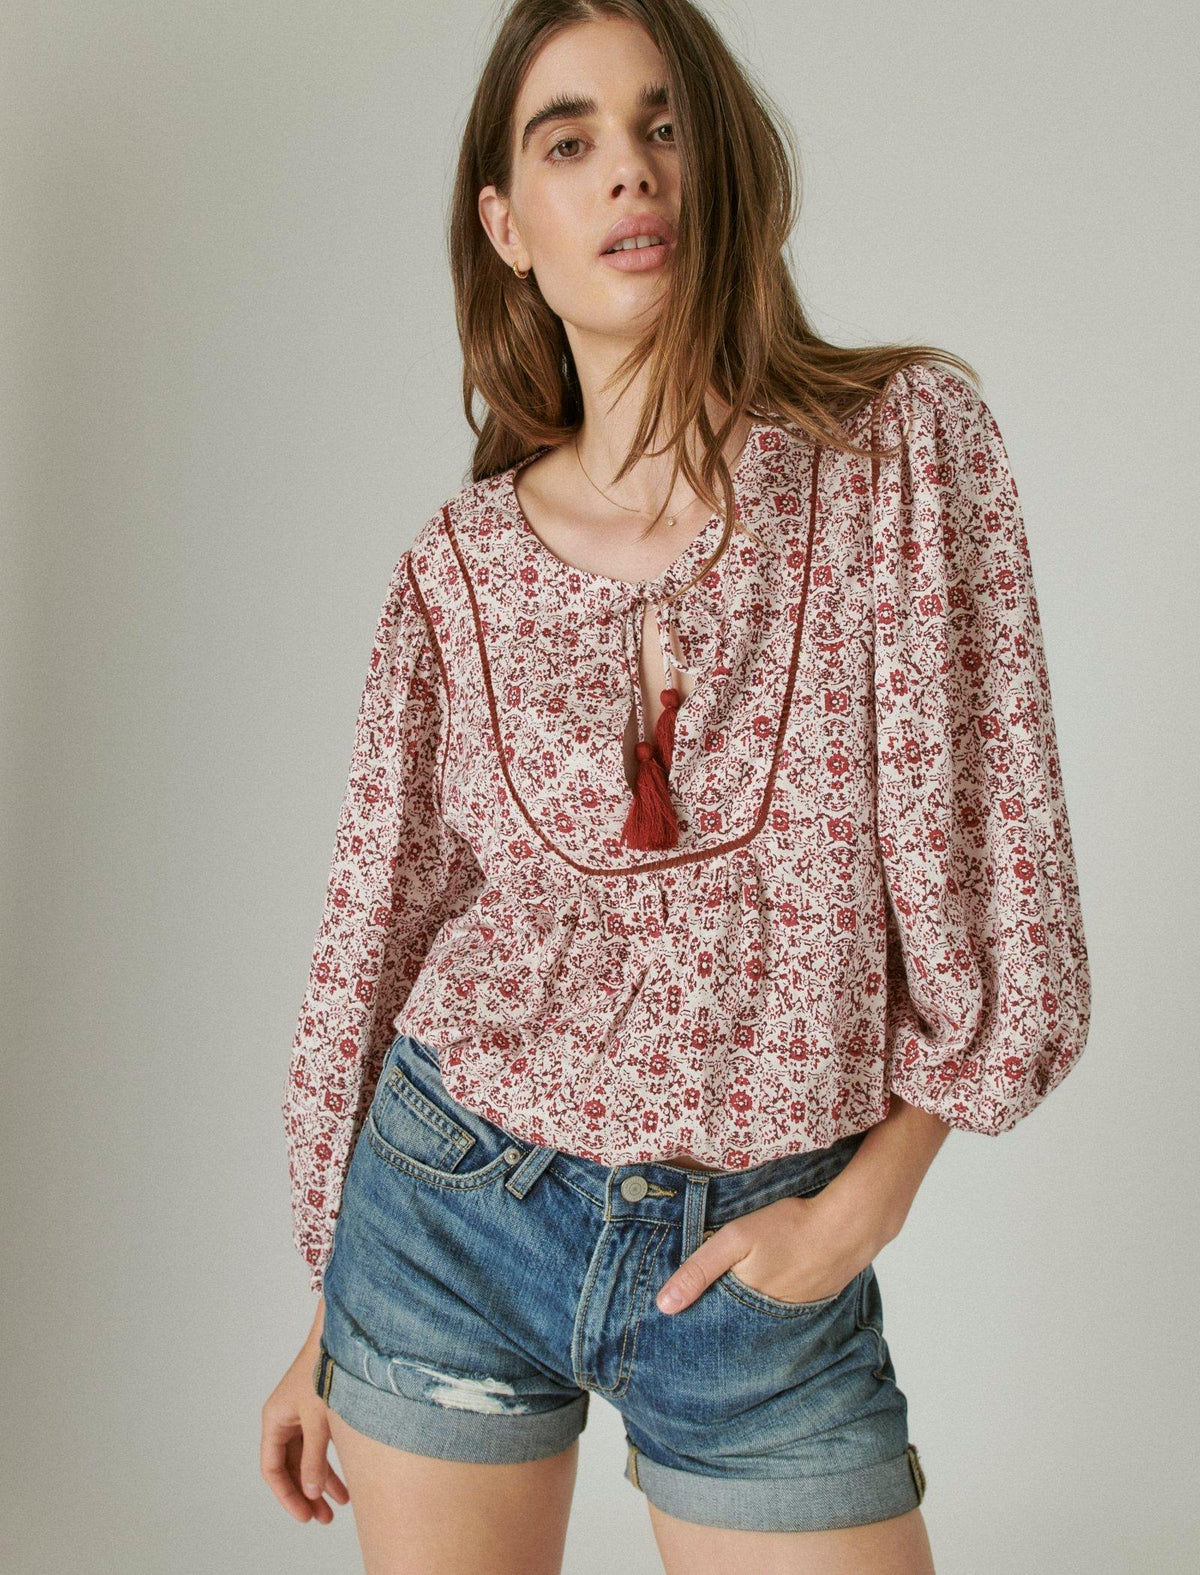 Lucky Brand Floral Peasant Blouse - Women's Clothing Peasant Tops Shirts Burgundy Multi